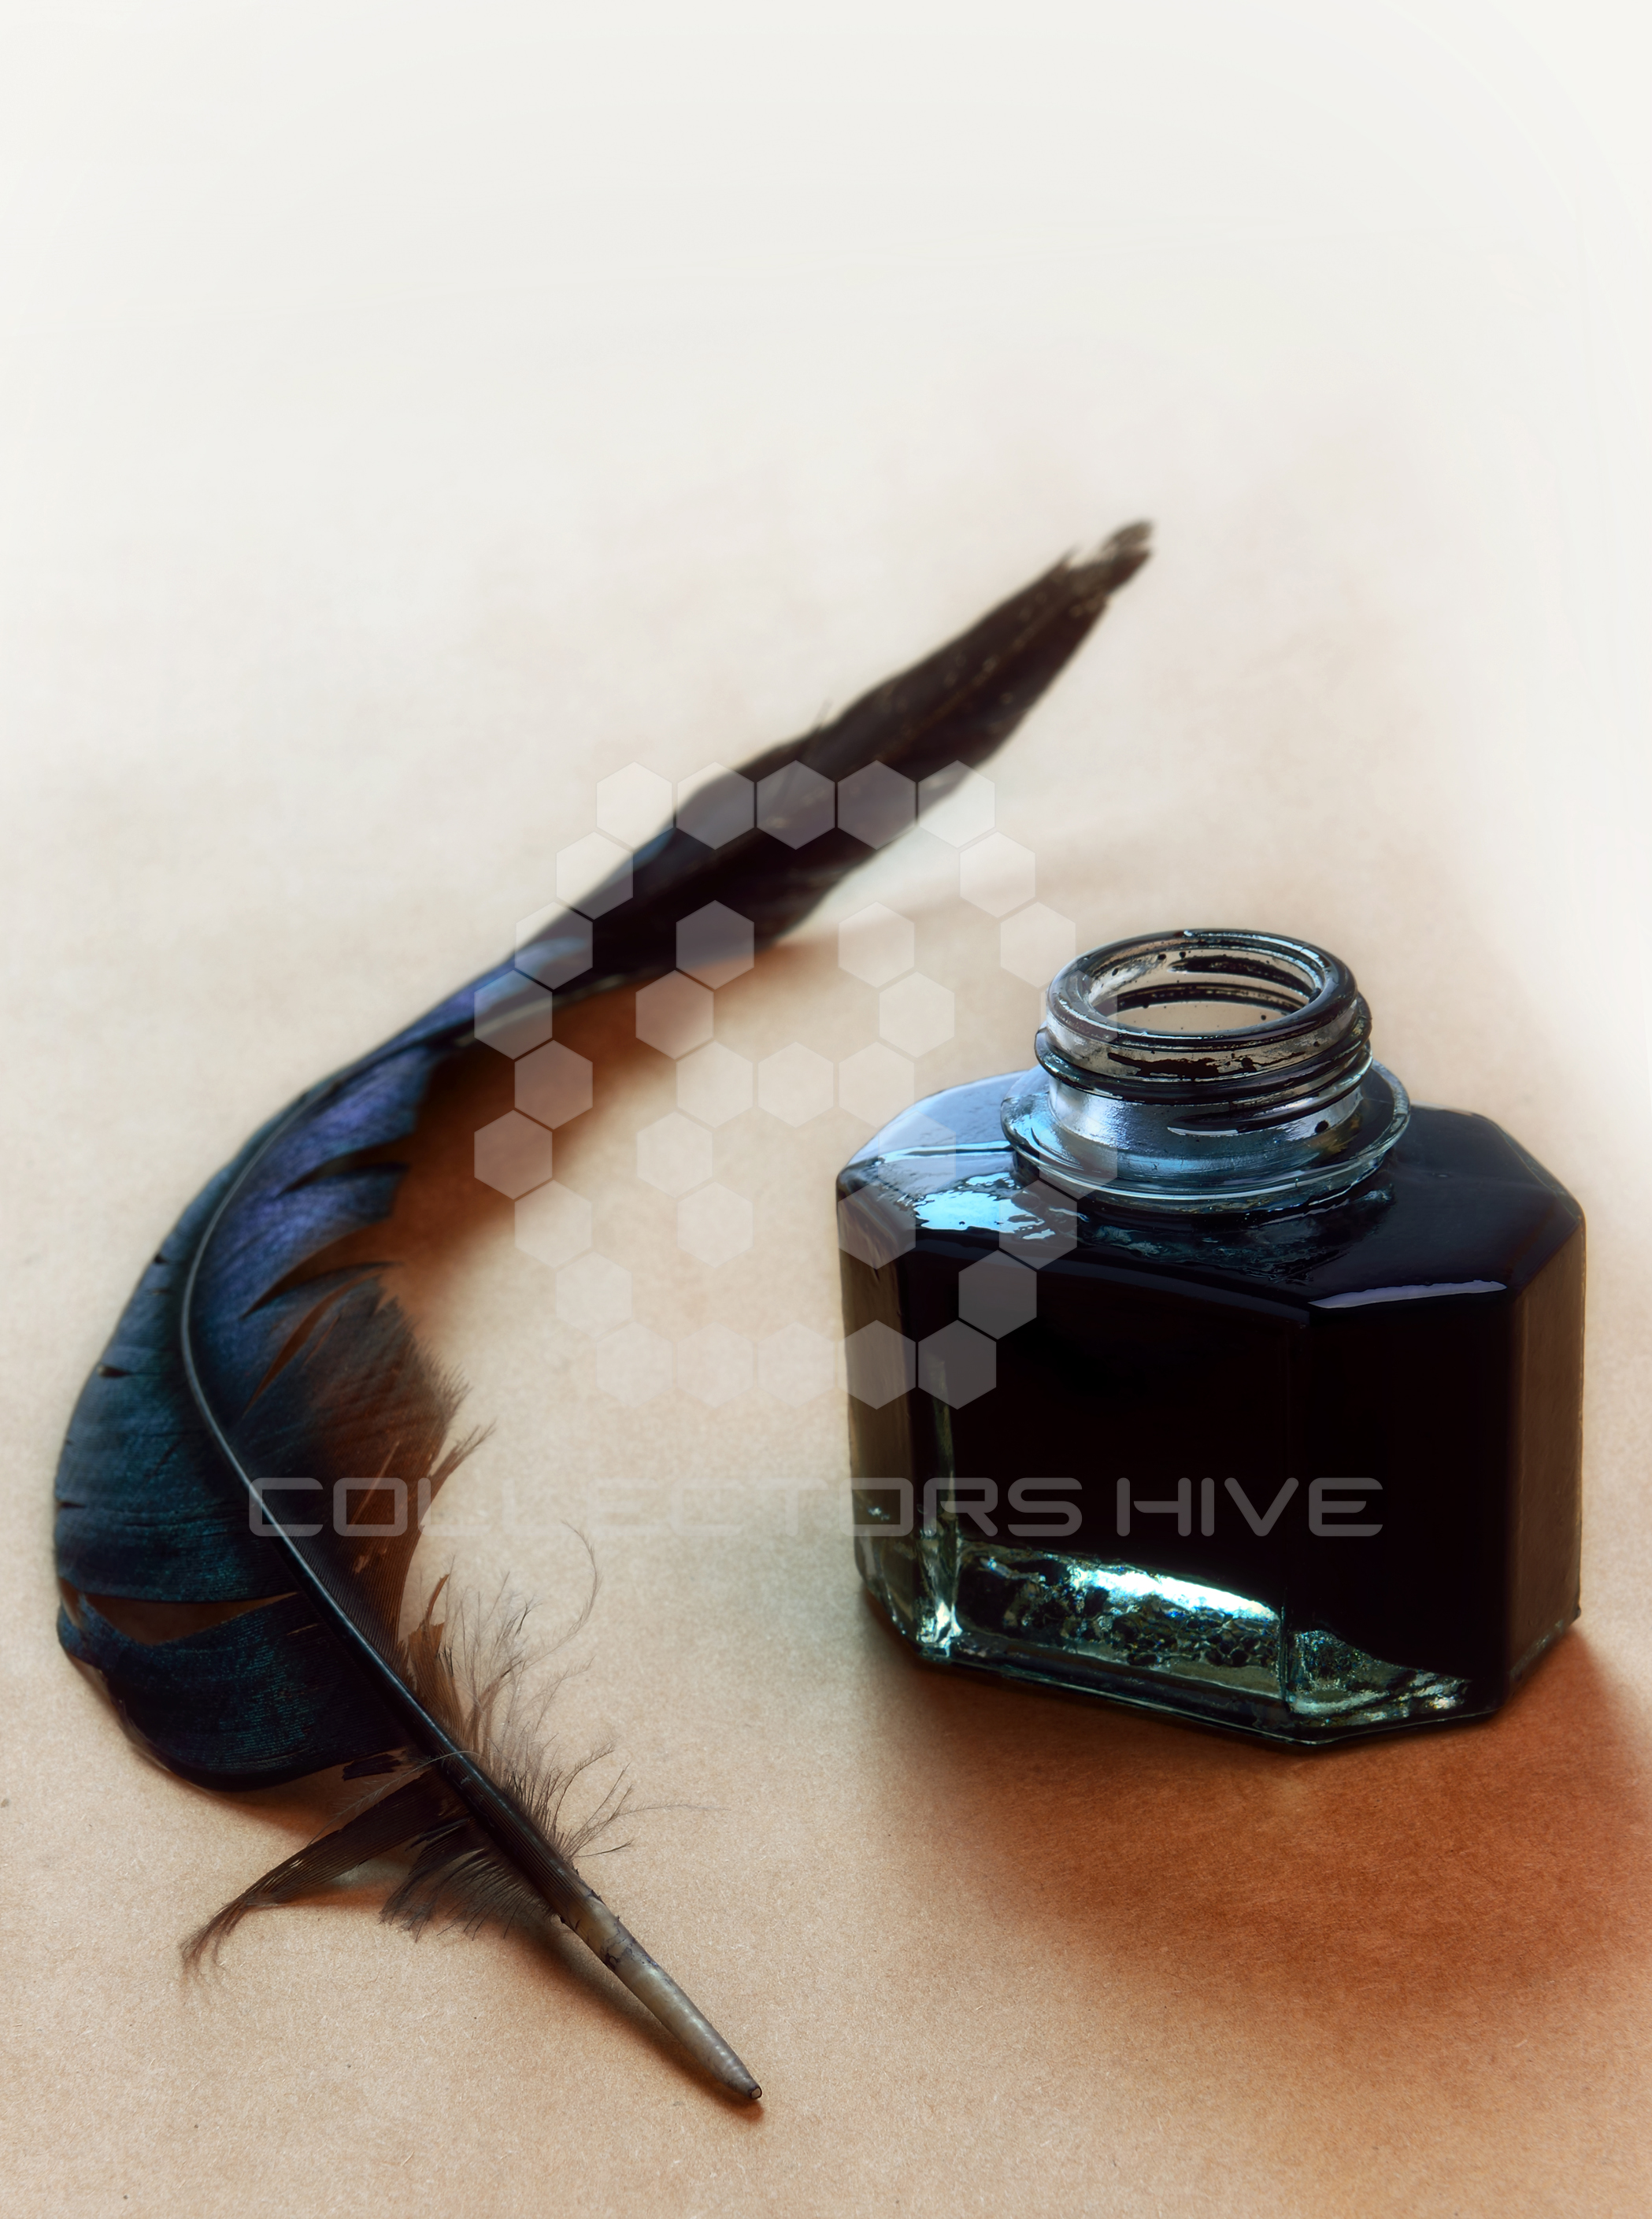 Feather and ink bottle on brown paper background